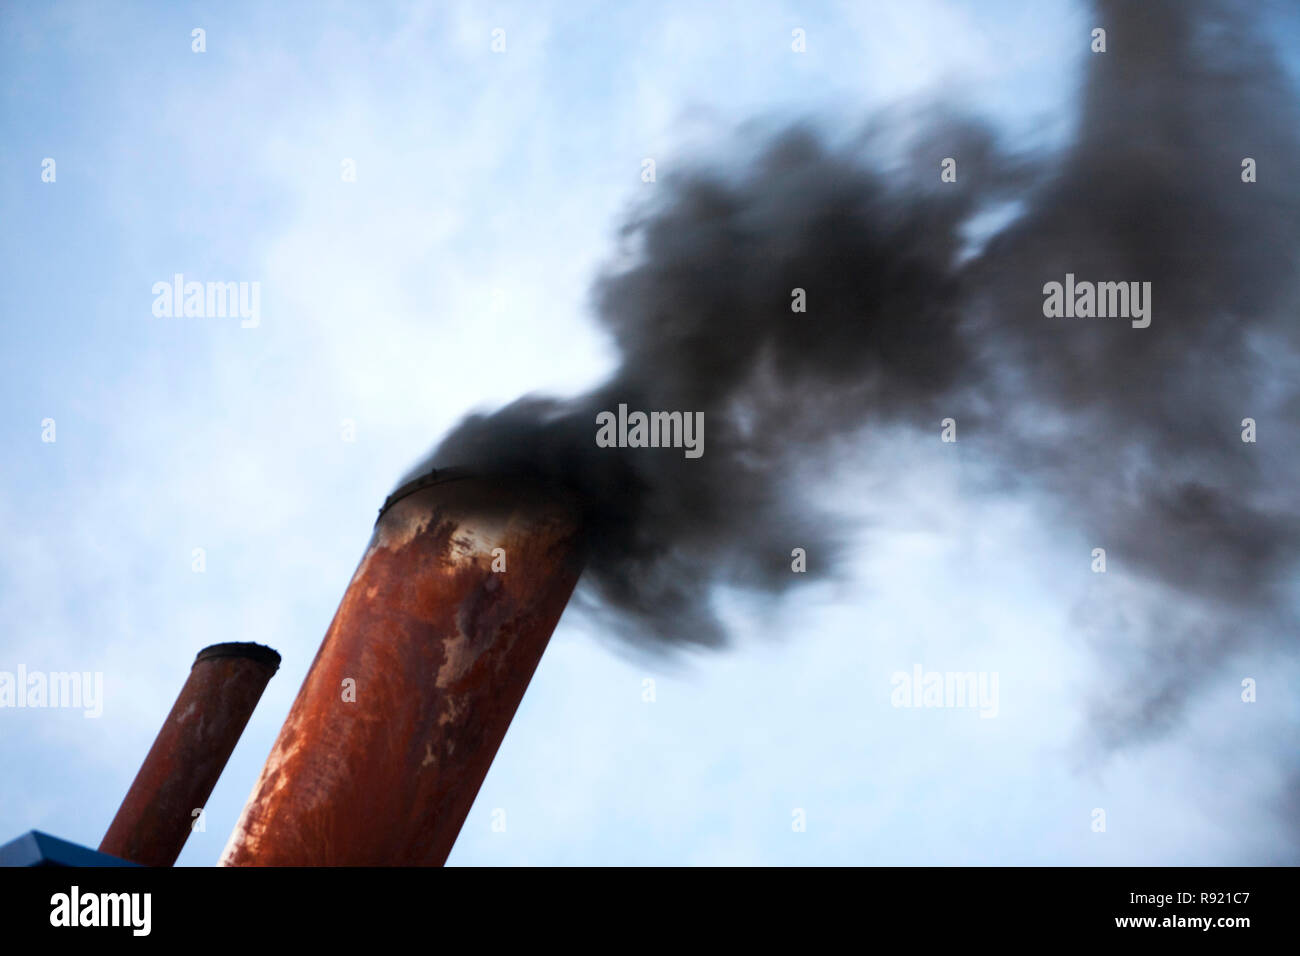 Exhaust emissions, the result of burning marine diesel in a ships engine. Marine diesel is one of the most polluting fuels in the world. Stock Photo